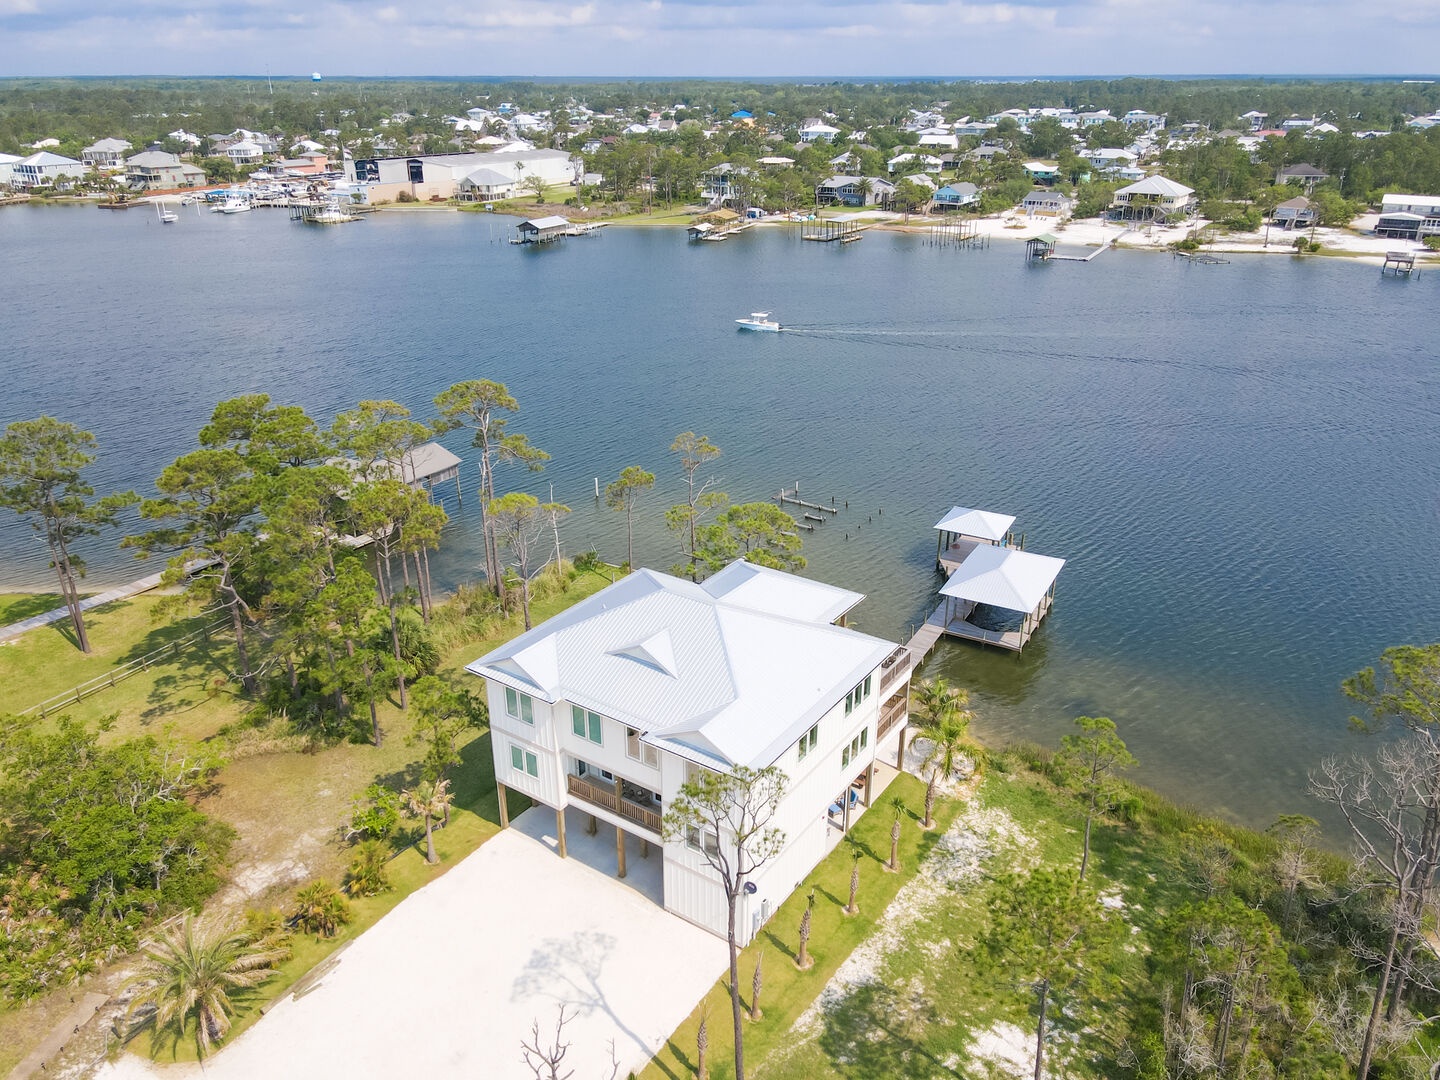 This luxury 7 bedroom home is located on Cotton Bayou